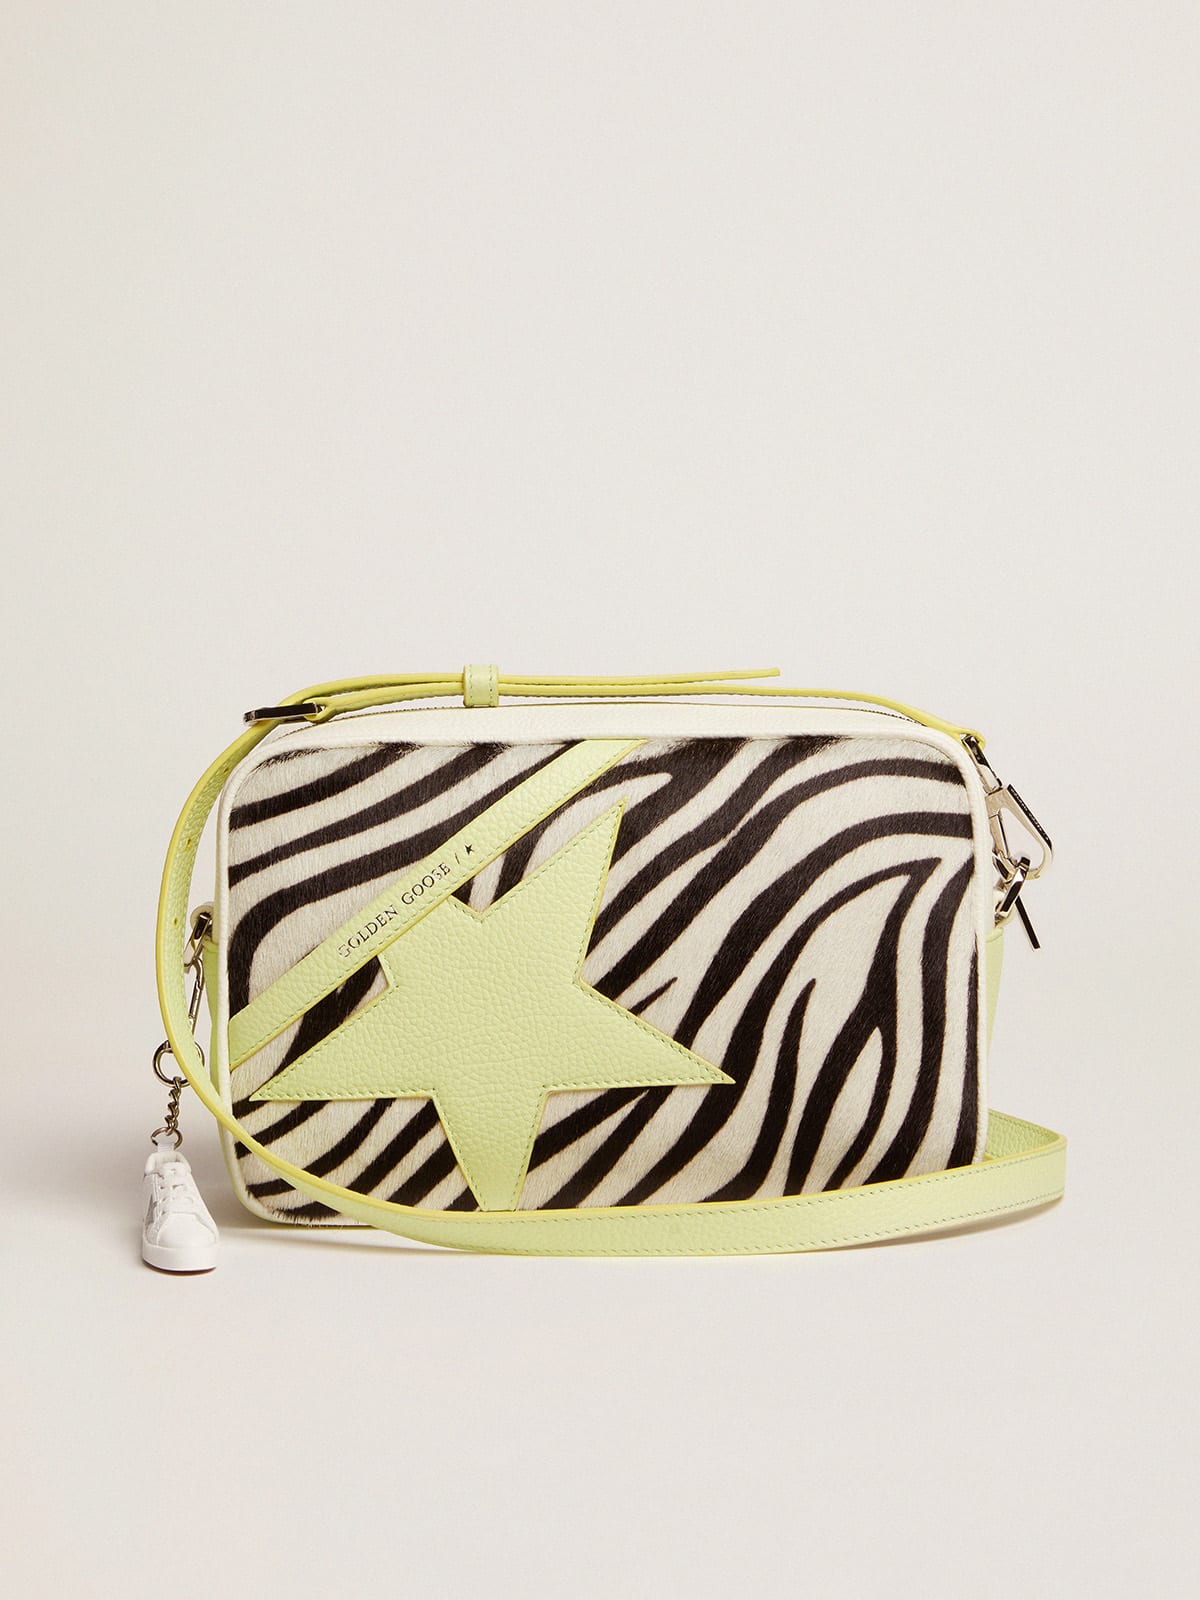 Golden Goose - Star Bag in white and lime hammered leather with zebra-print pony skin insert and lime-colored leather star in 